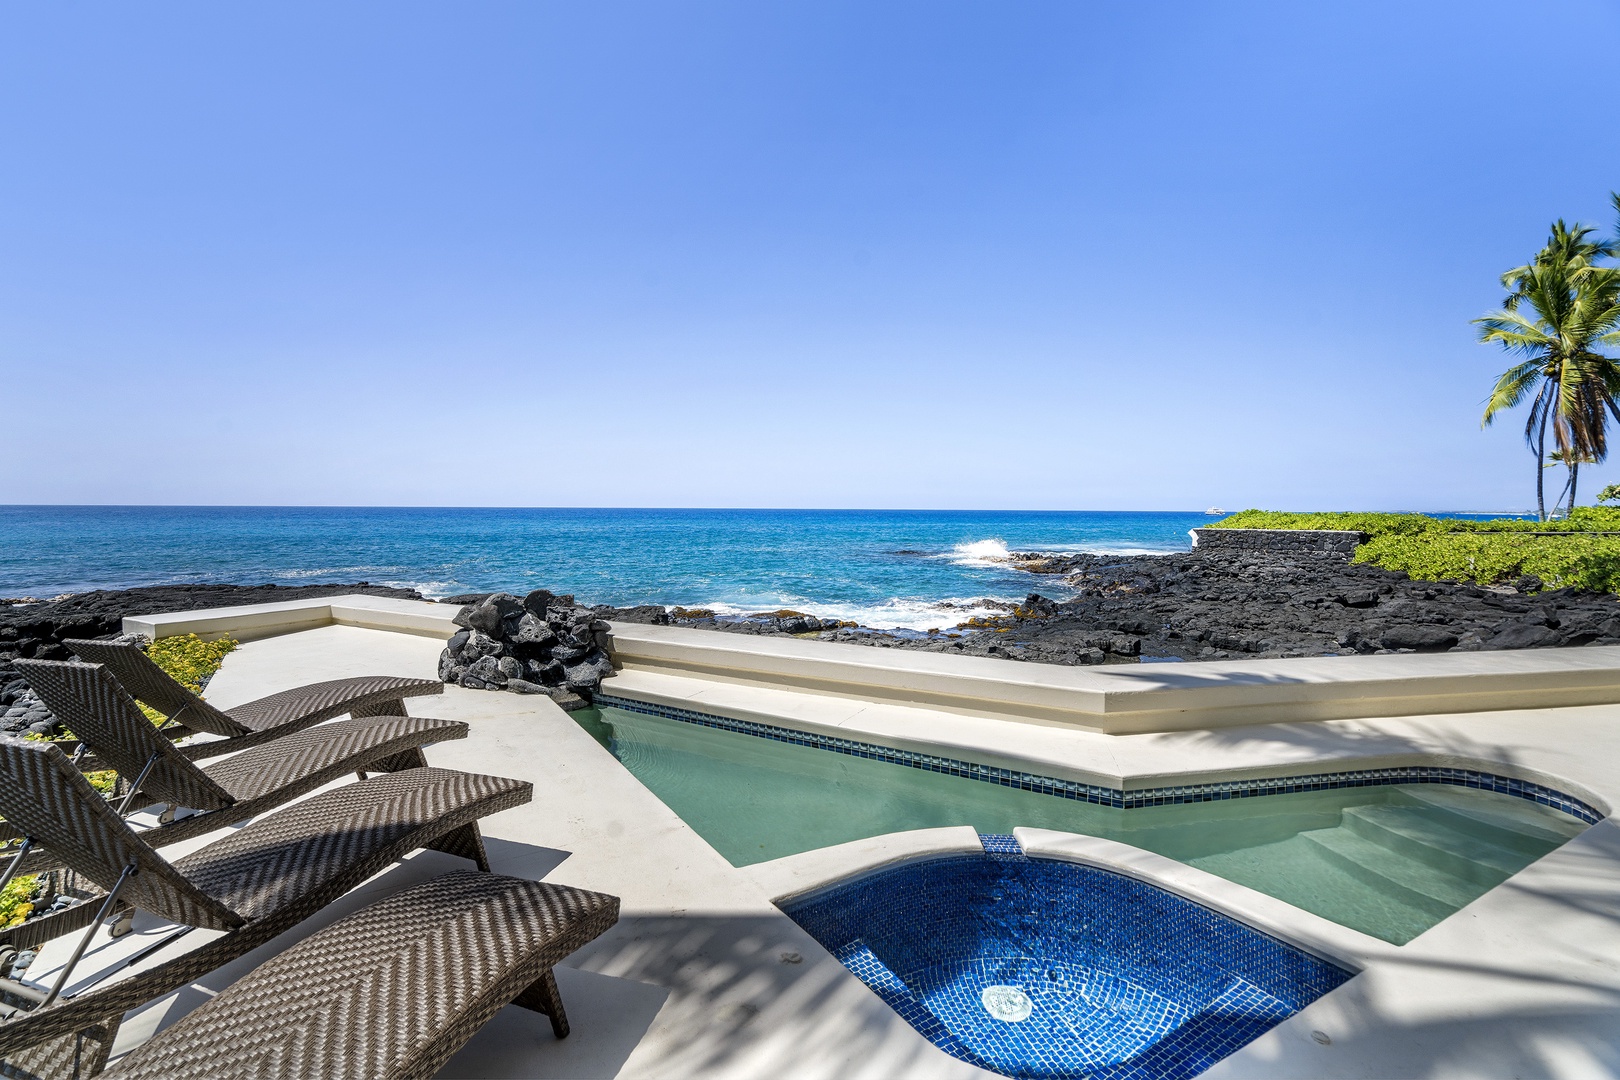 Kailua Kona Vacation Rentals, Dolphin Manor - Private plunge pool & spa are two of the fabulous features at Dolphin Manor